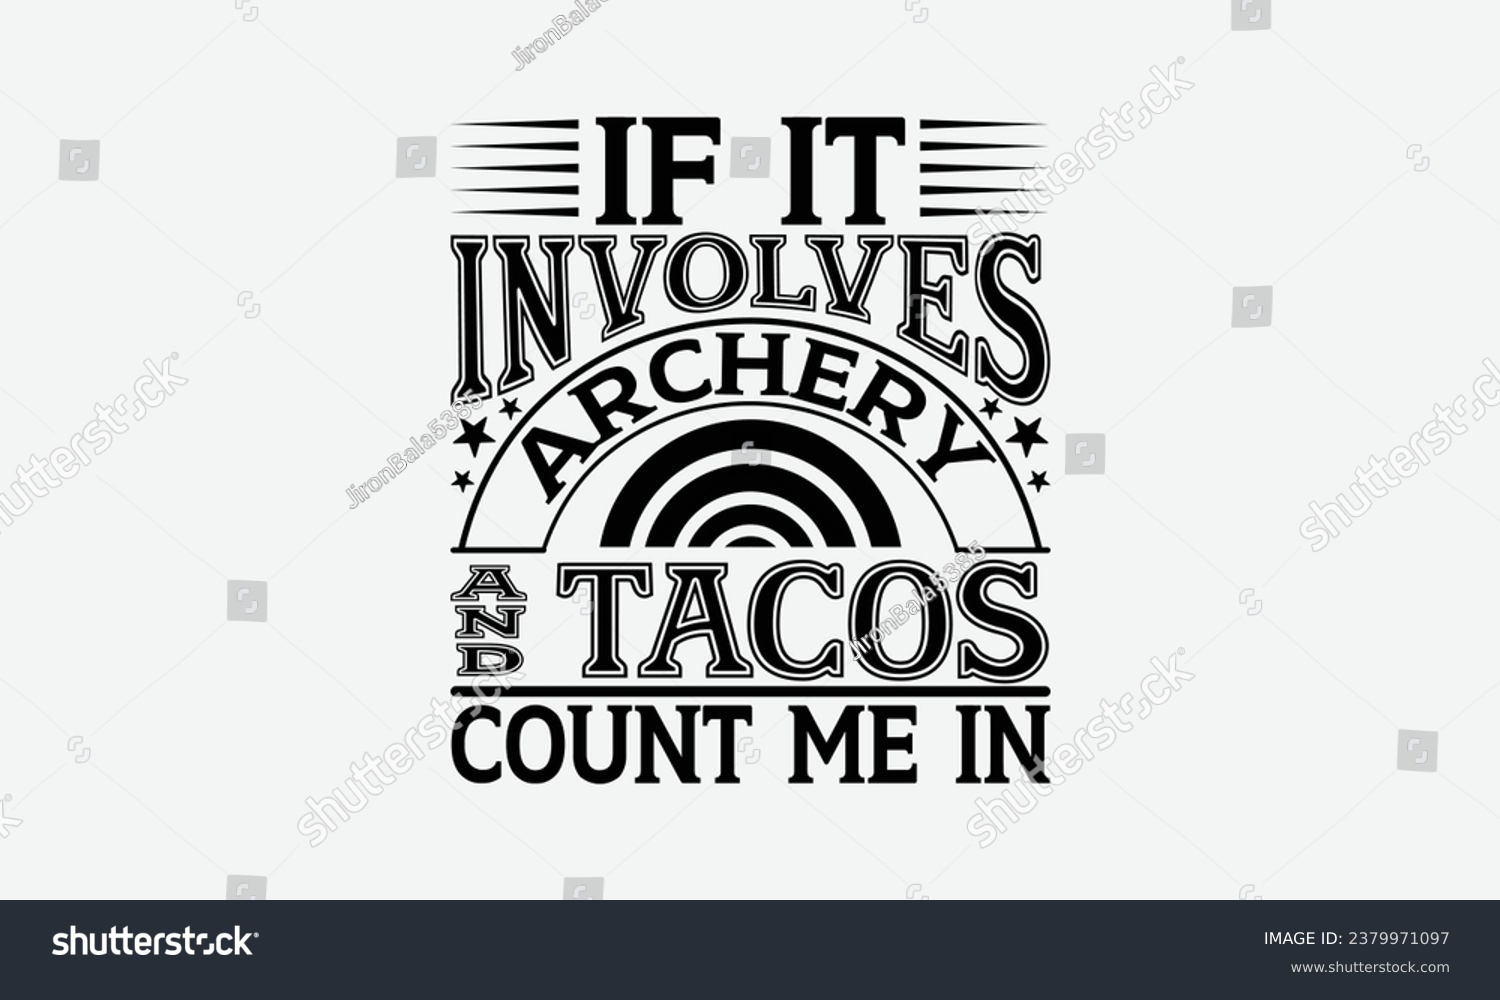 SVG of If It Involves Archery and Tacos Count Me In - Camping t shirts design, Hand drawn lettering phrase, Calligraphy t shirt design, Templet, mugs, etc, Vector EPS Editable Files eps 10. svg